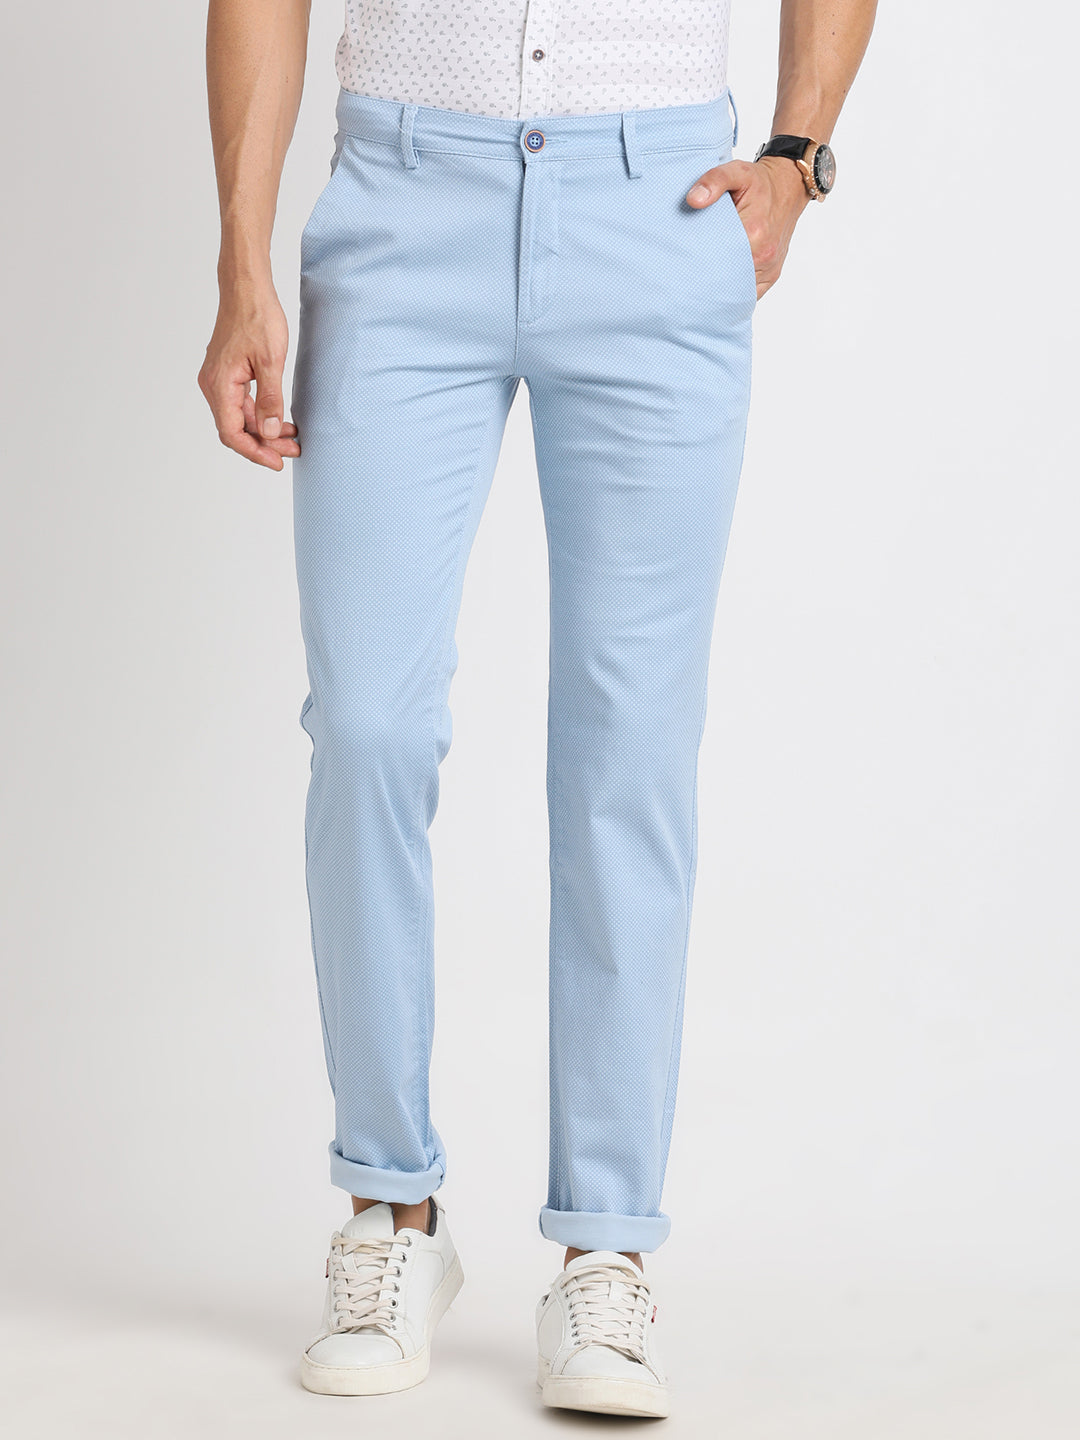 Cotton Stretch Sky Blue Printed Ultra Slim Fit Flat Front Casual Trouser